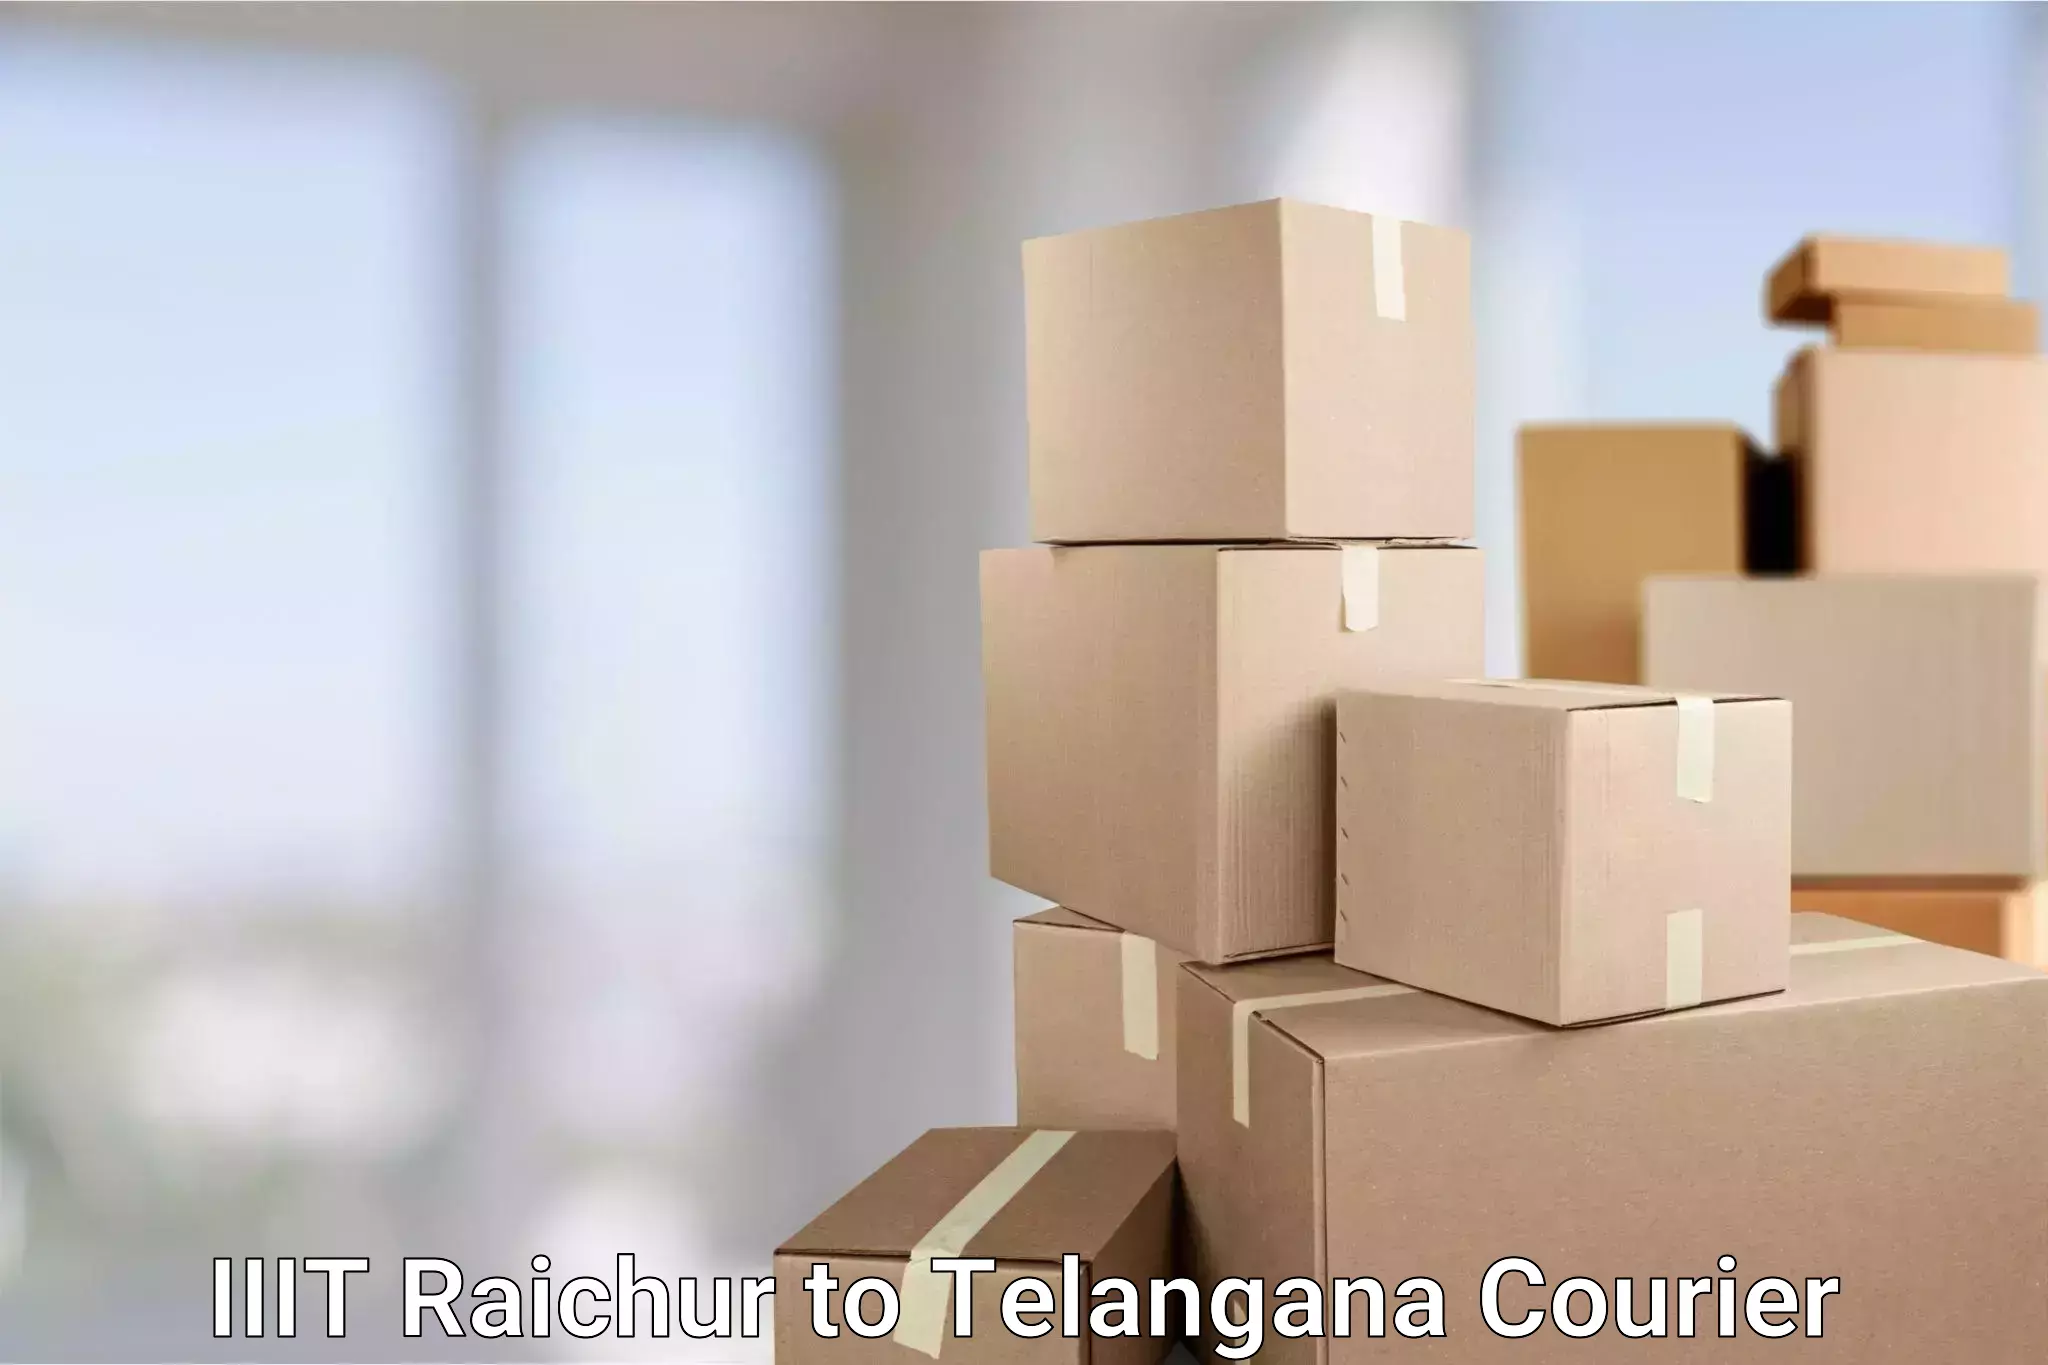 Affordable parcel service IIIT Raichur to Chintoor